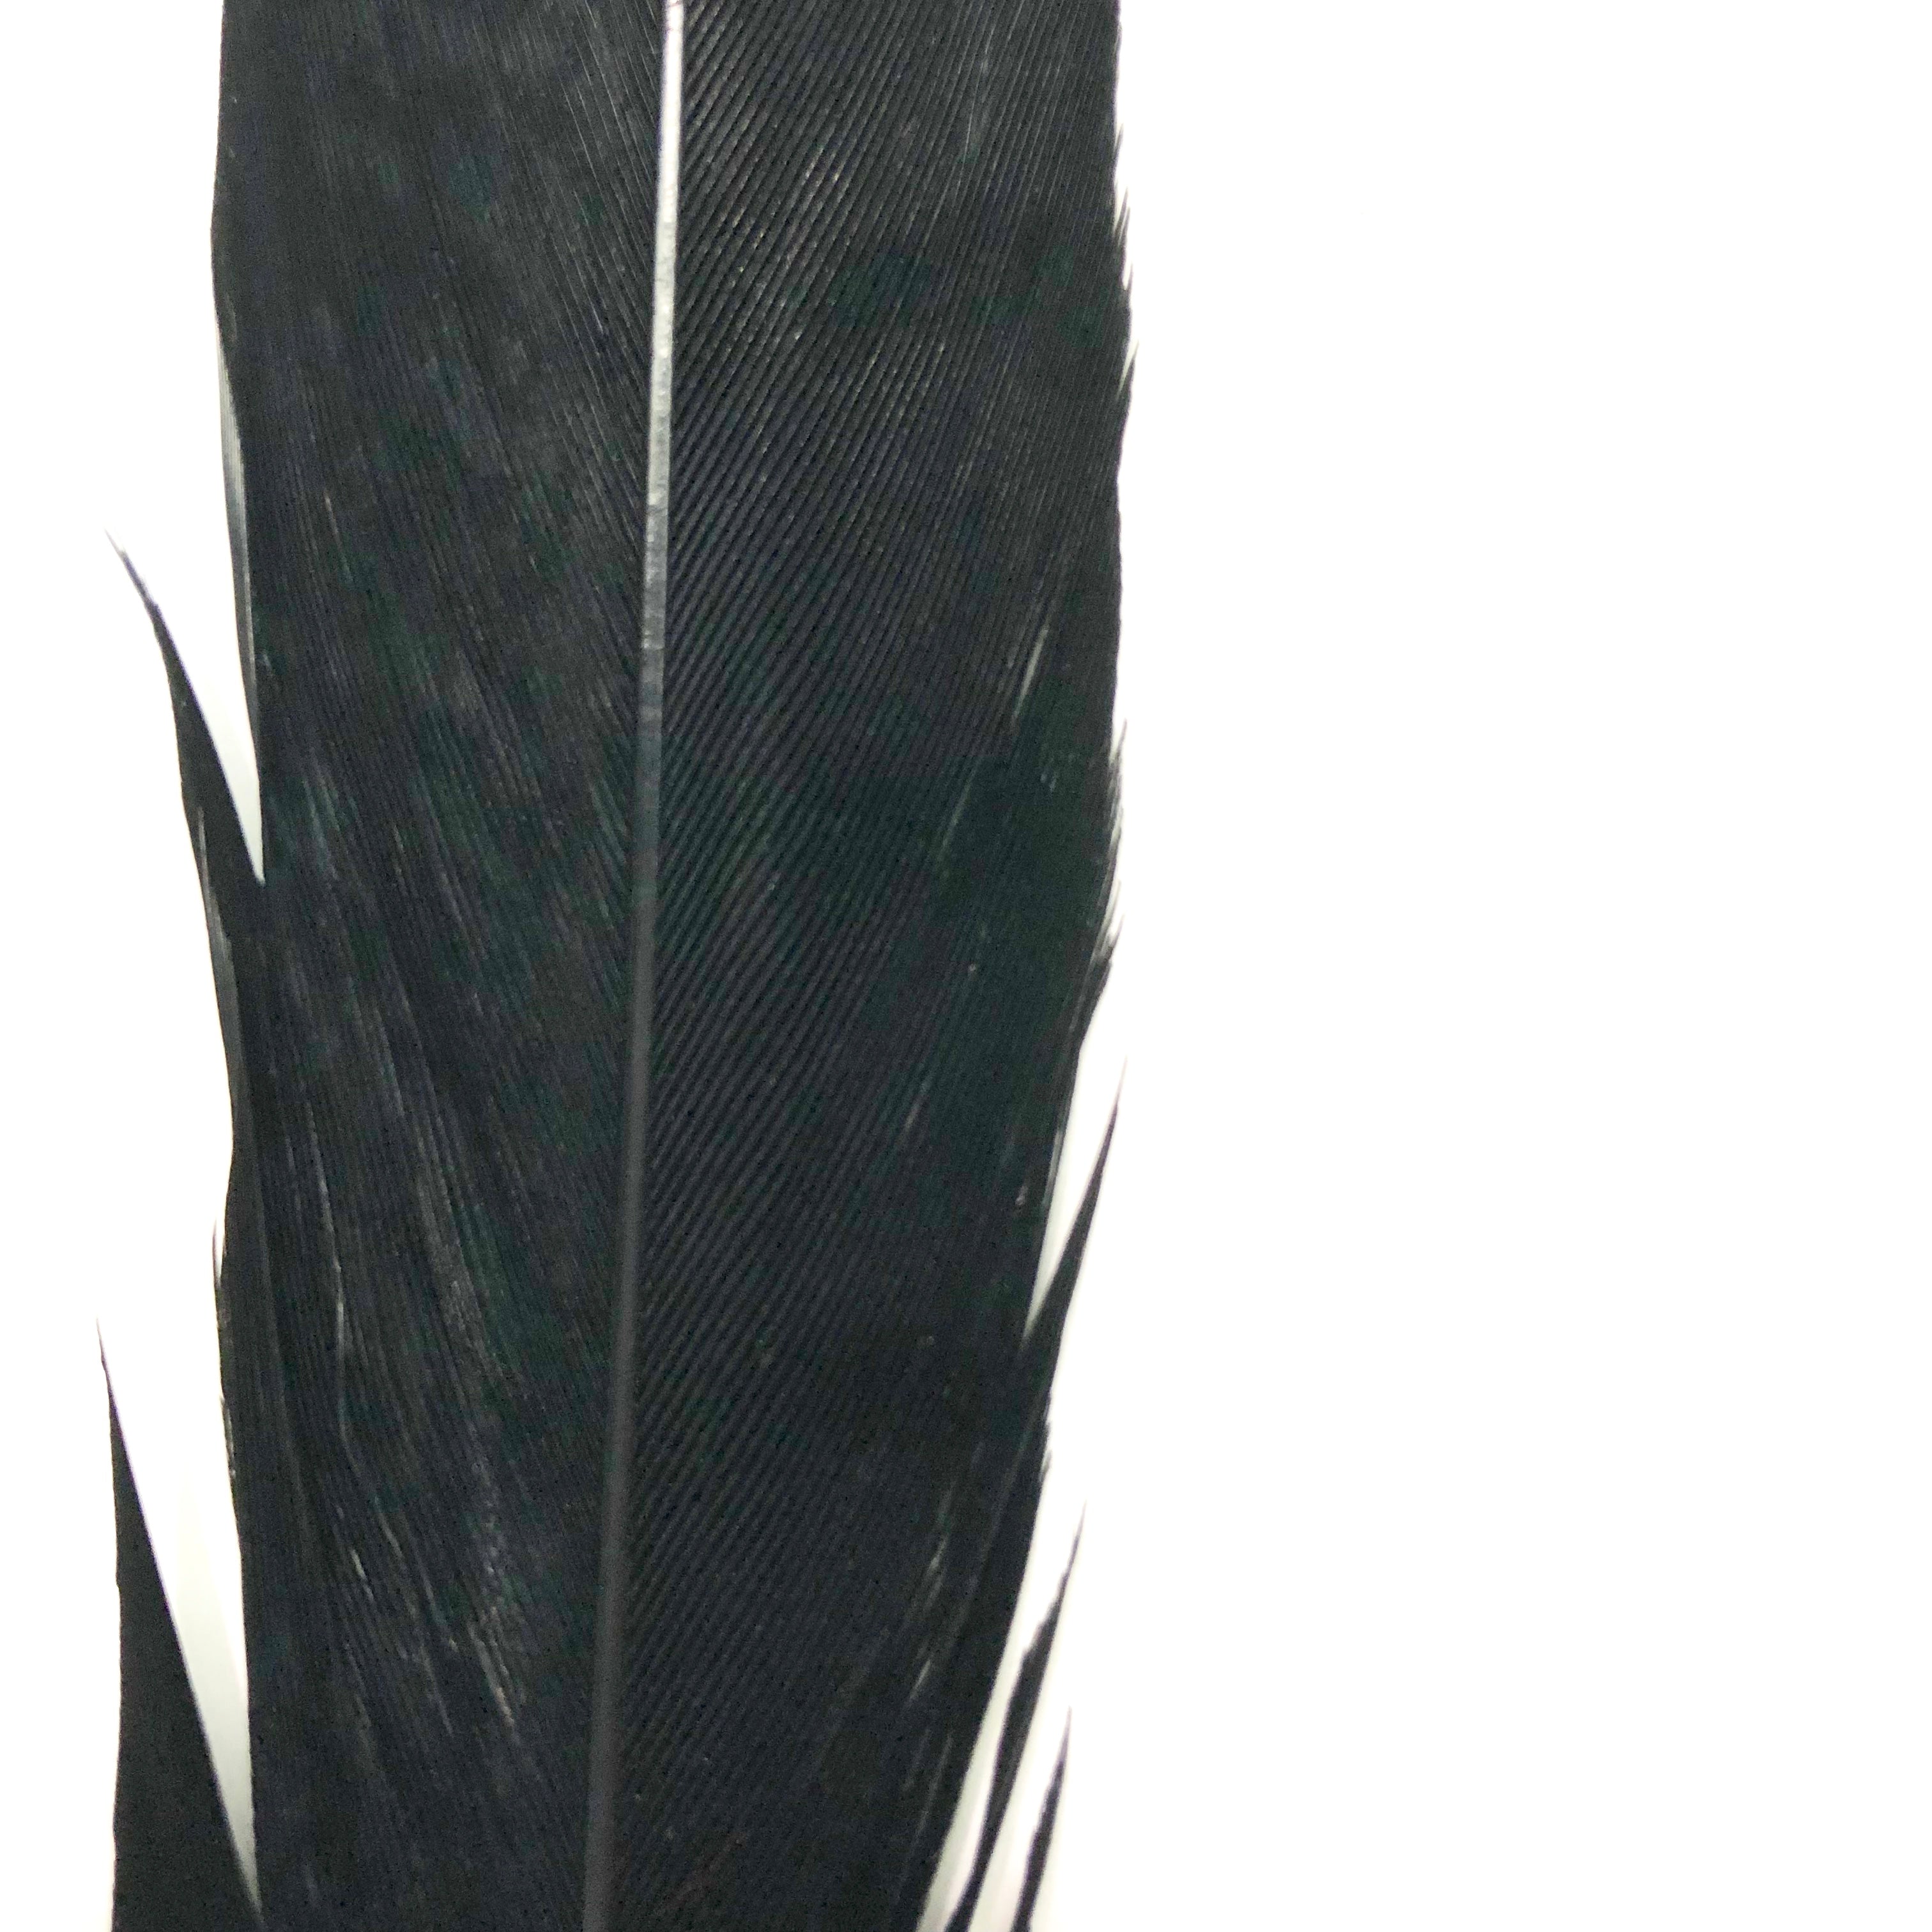 20" to 30" Lady Amherst Pheasant Side Tail Feather - Black